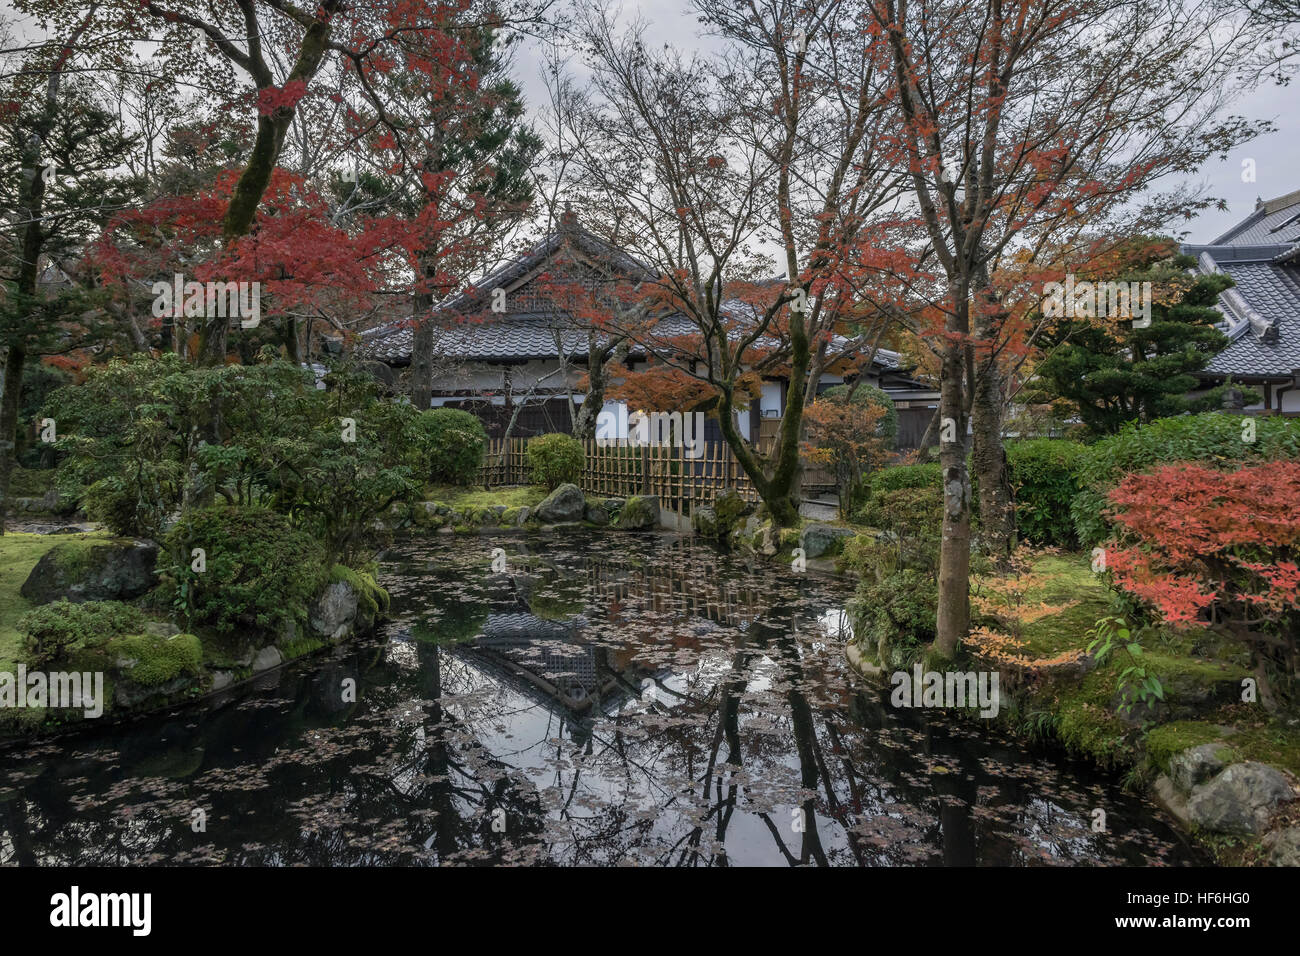 Pavilion and pond with fall leaves and reflections, Kiyomizu-dera Buddhist  temple, Kyoto, Japan Stock Photo